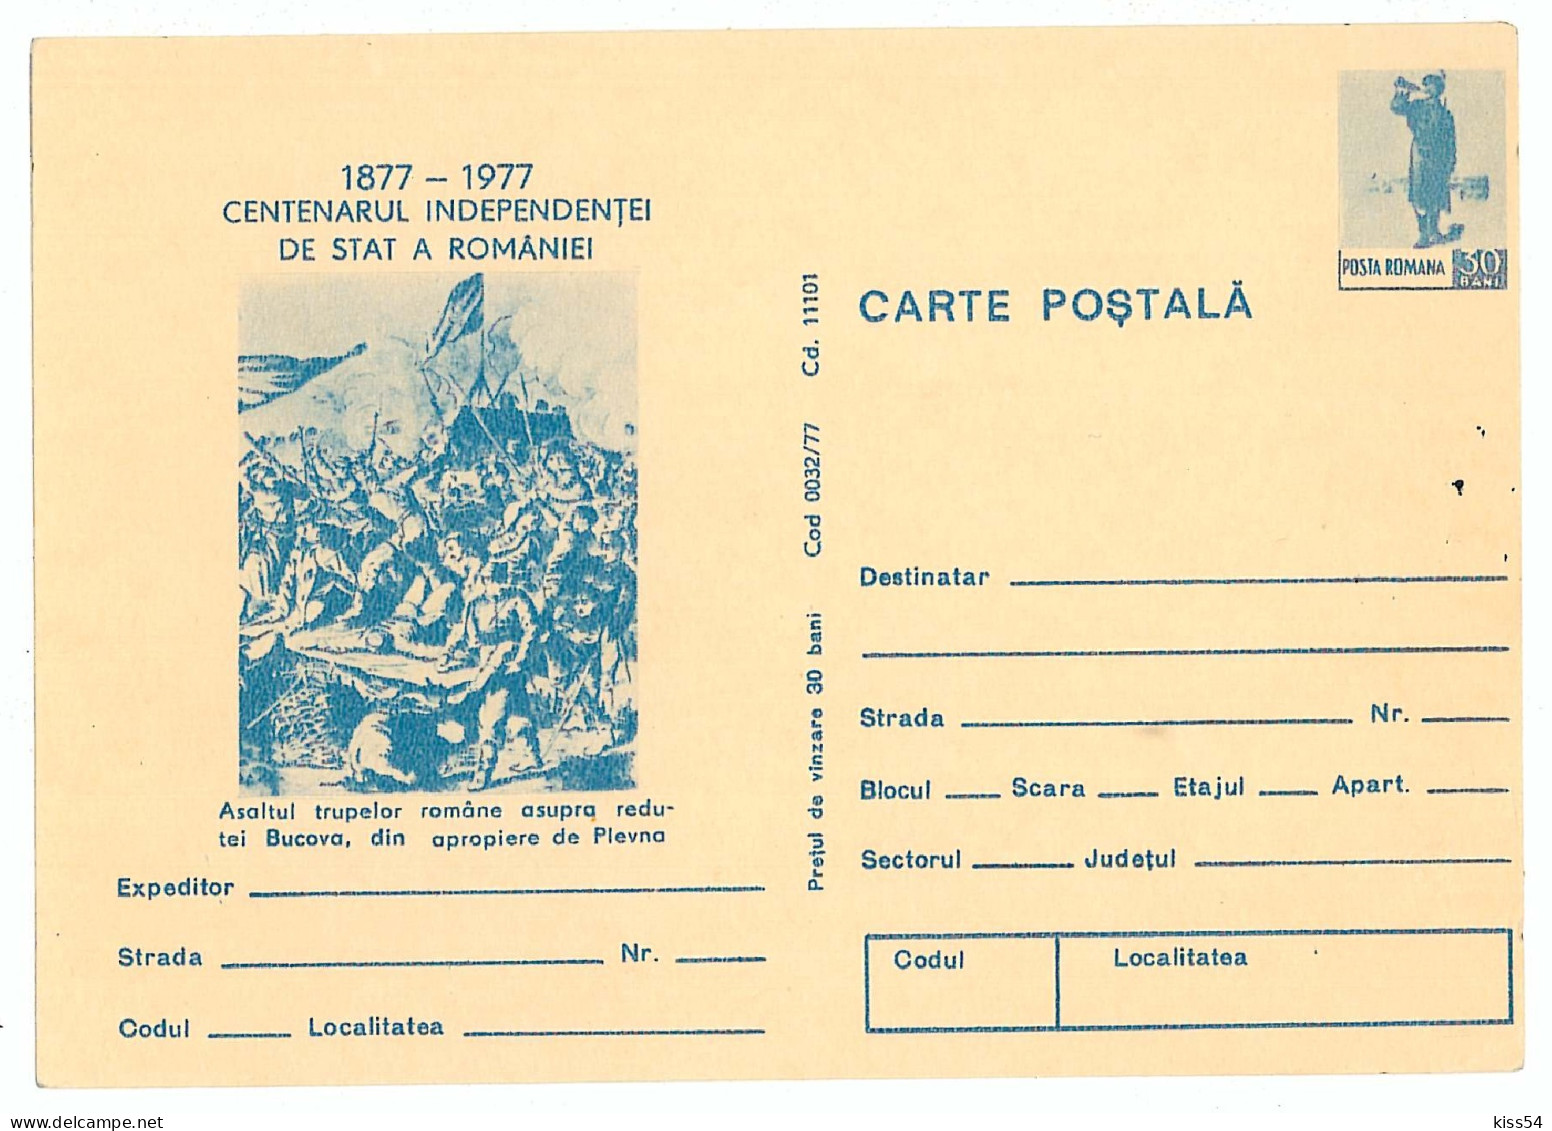 IP 77 A - 32 Centenary Independence Of Romania - Stationery - Unused - 1977 - Postal Stationery